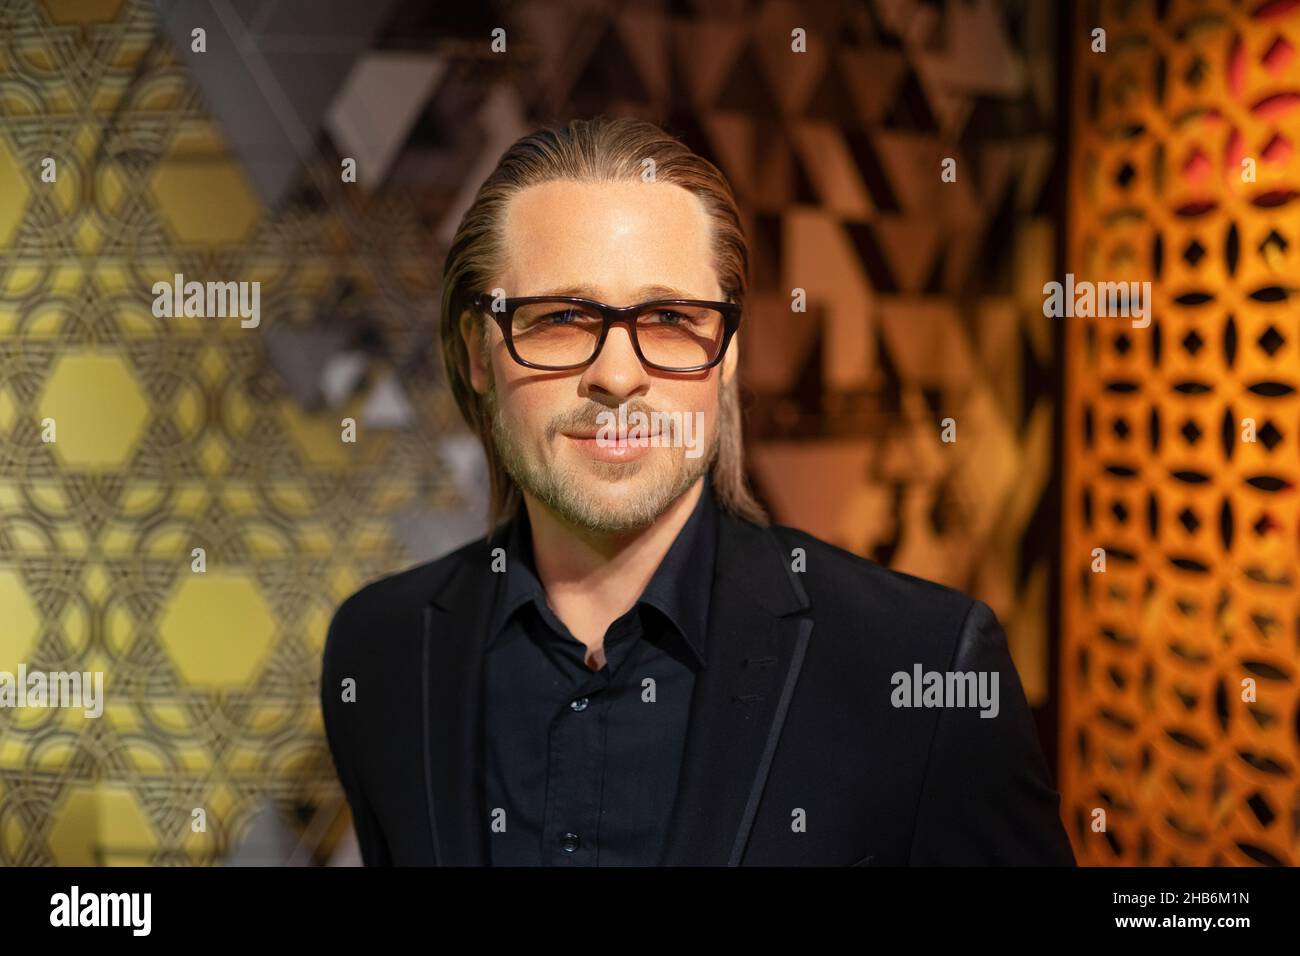 Brad Pitt wax sculpture at Madame Tussauds Istanbul. Brad Pitt is an American actor and film producer. Stock Photo